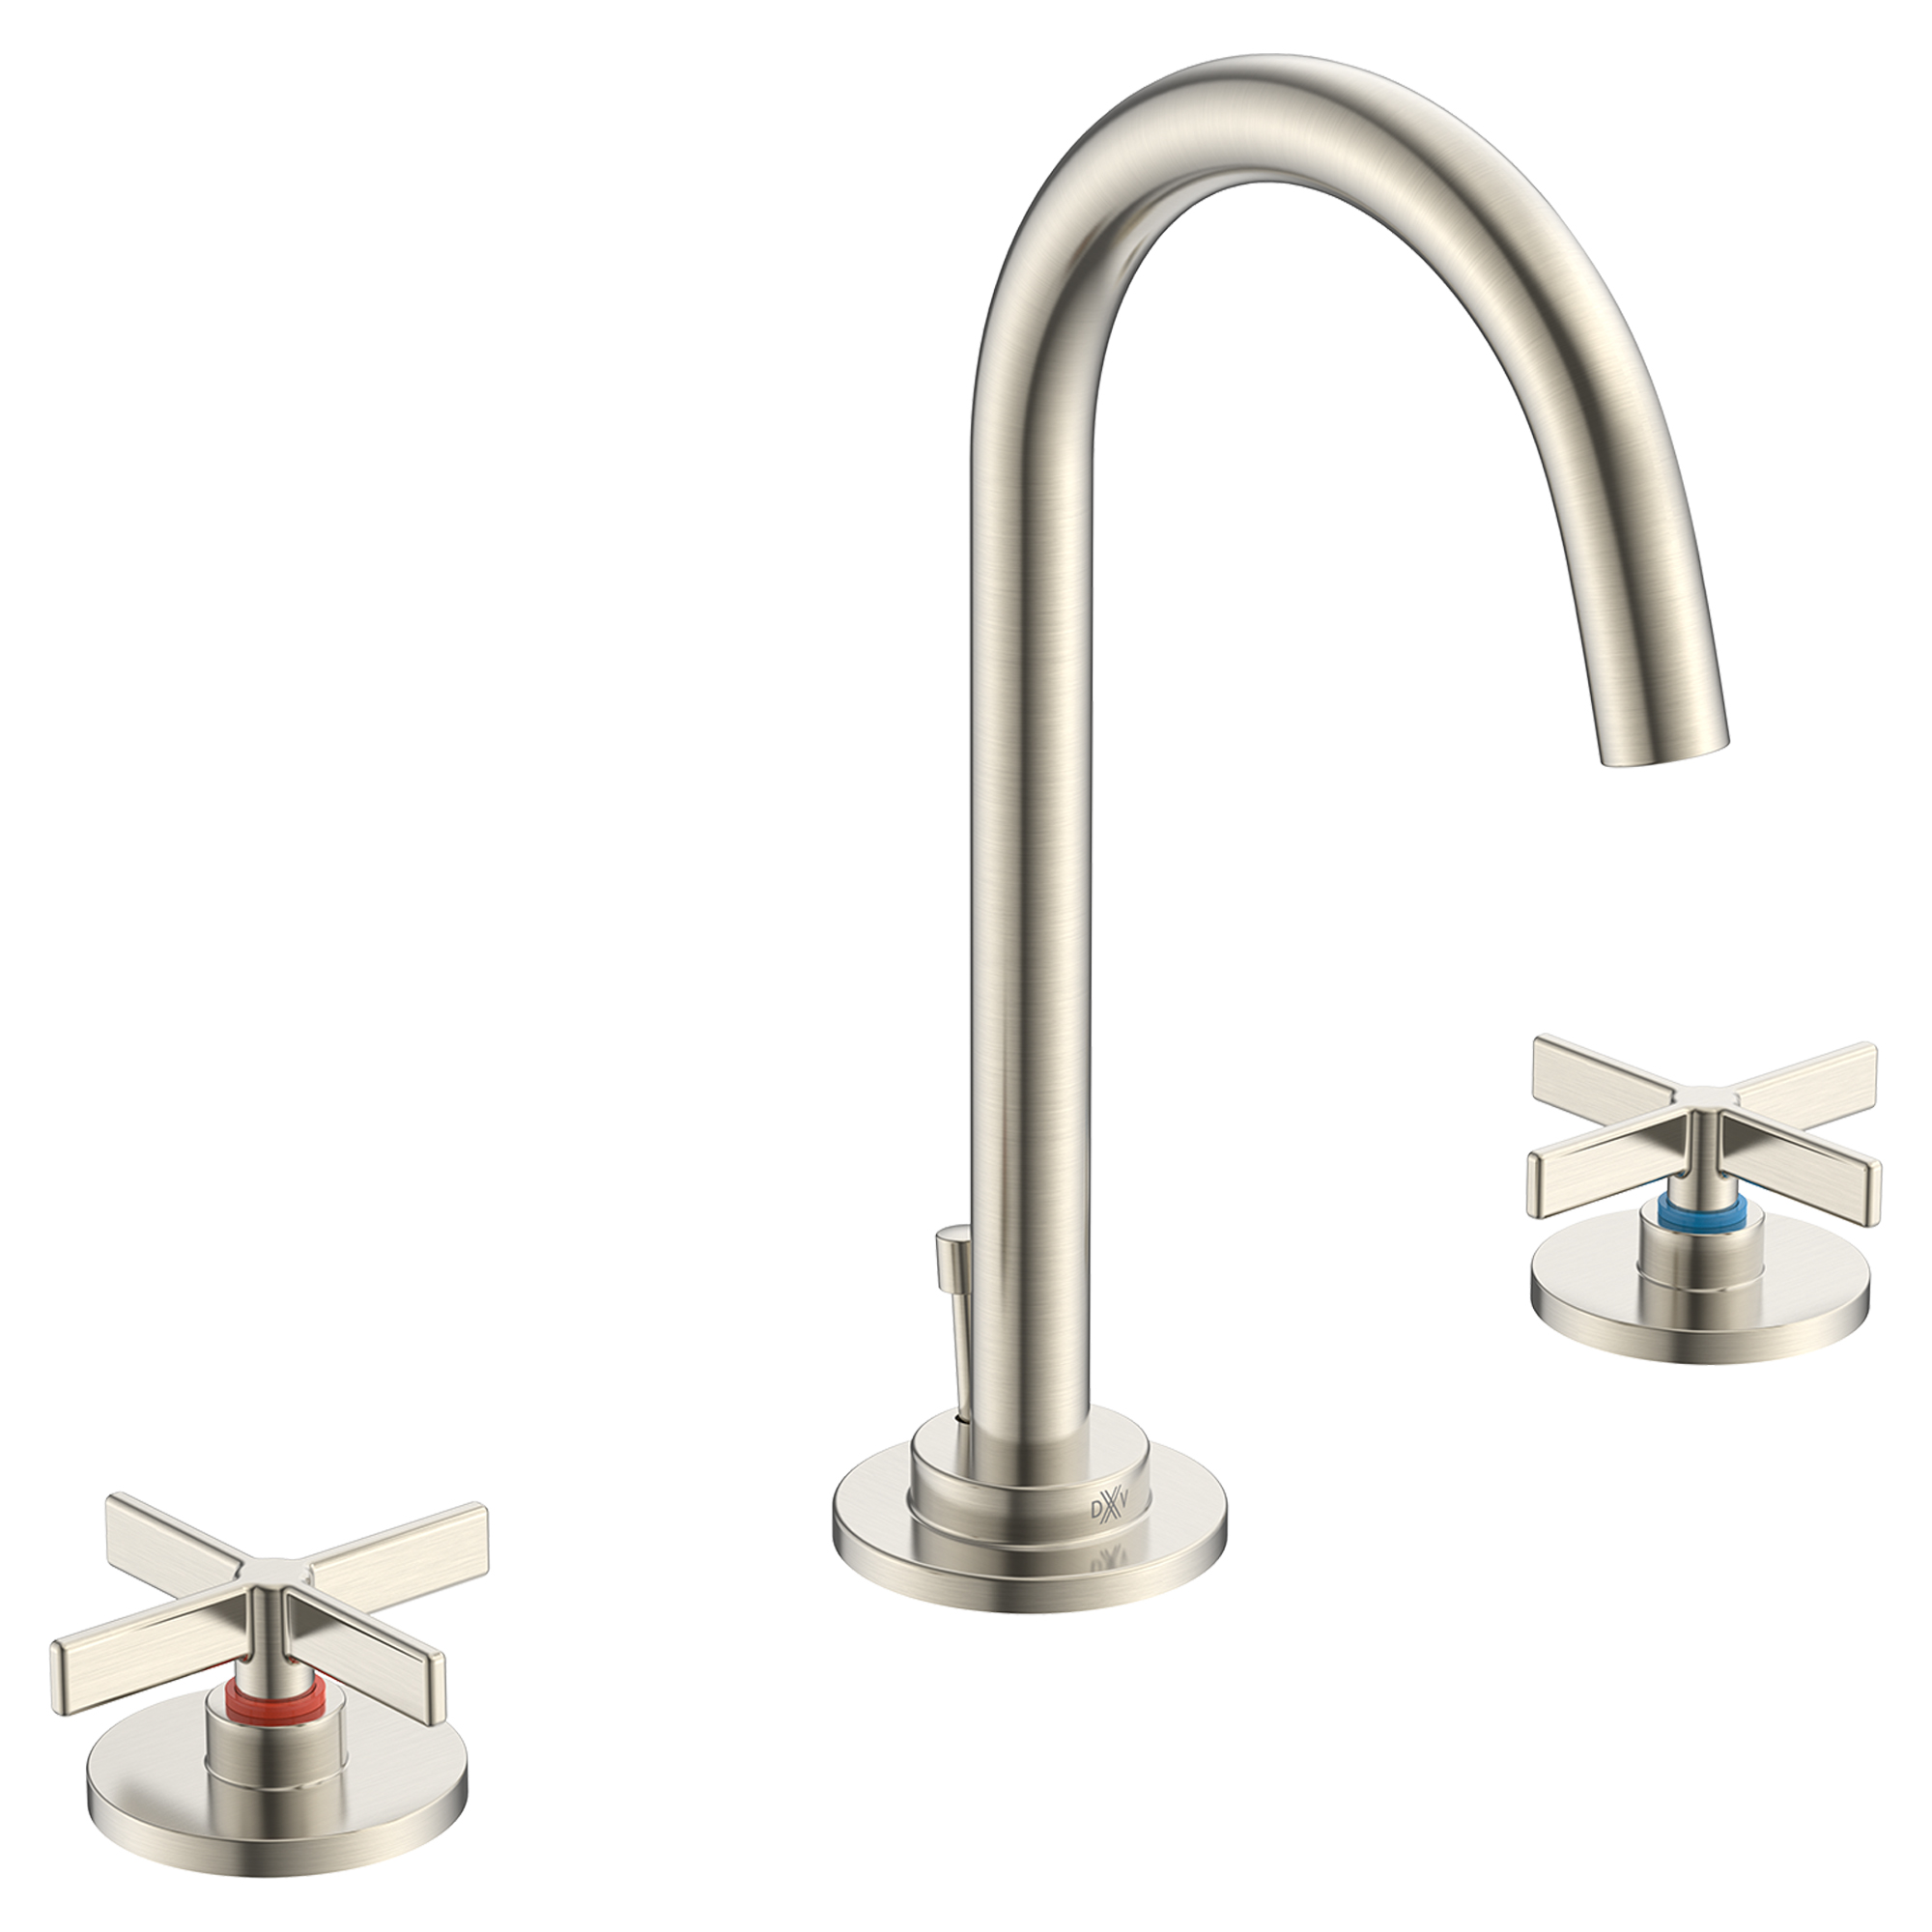 Percy® 2-Handle Widespread Bathroom Faucet with Indicator Markings and Cross Handles